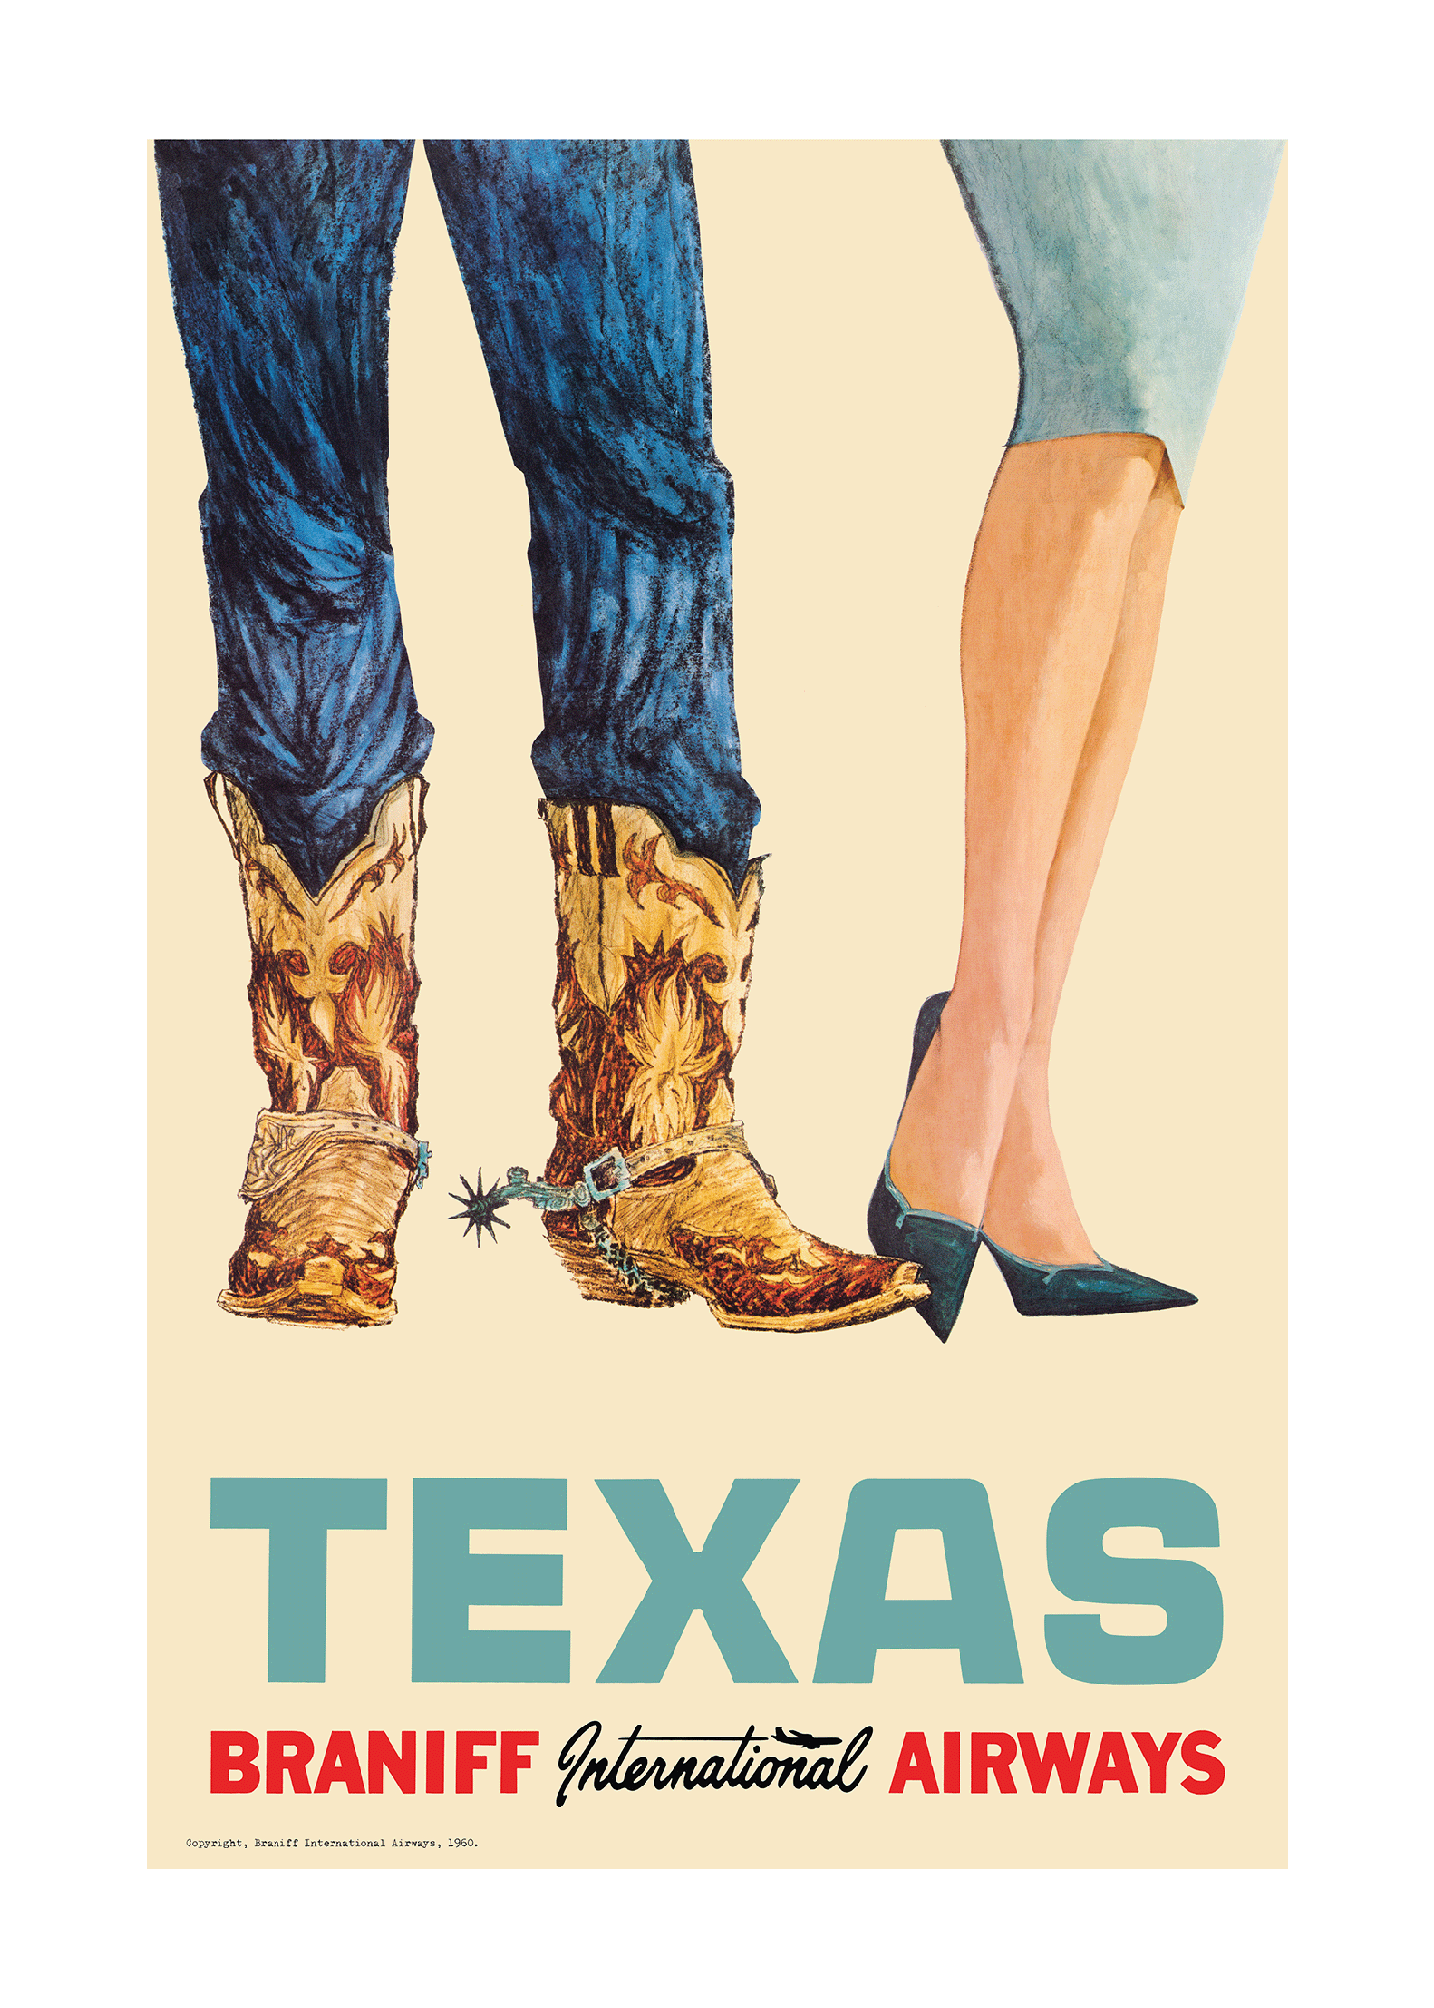 Texas, Braniff International Airways - United Air Lines, 1960s [Cow boots].